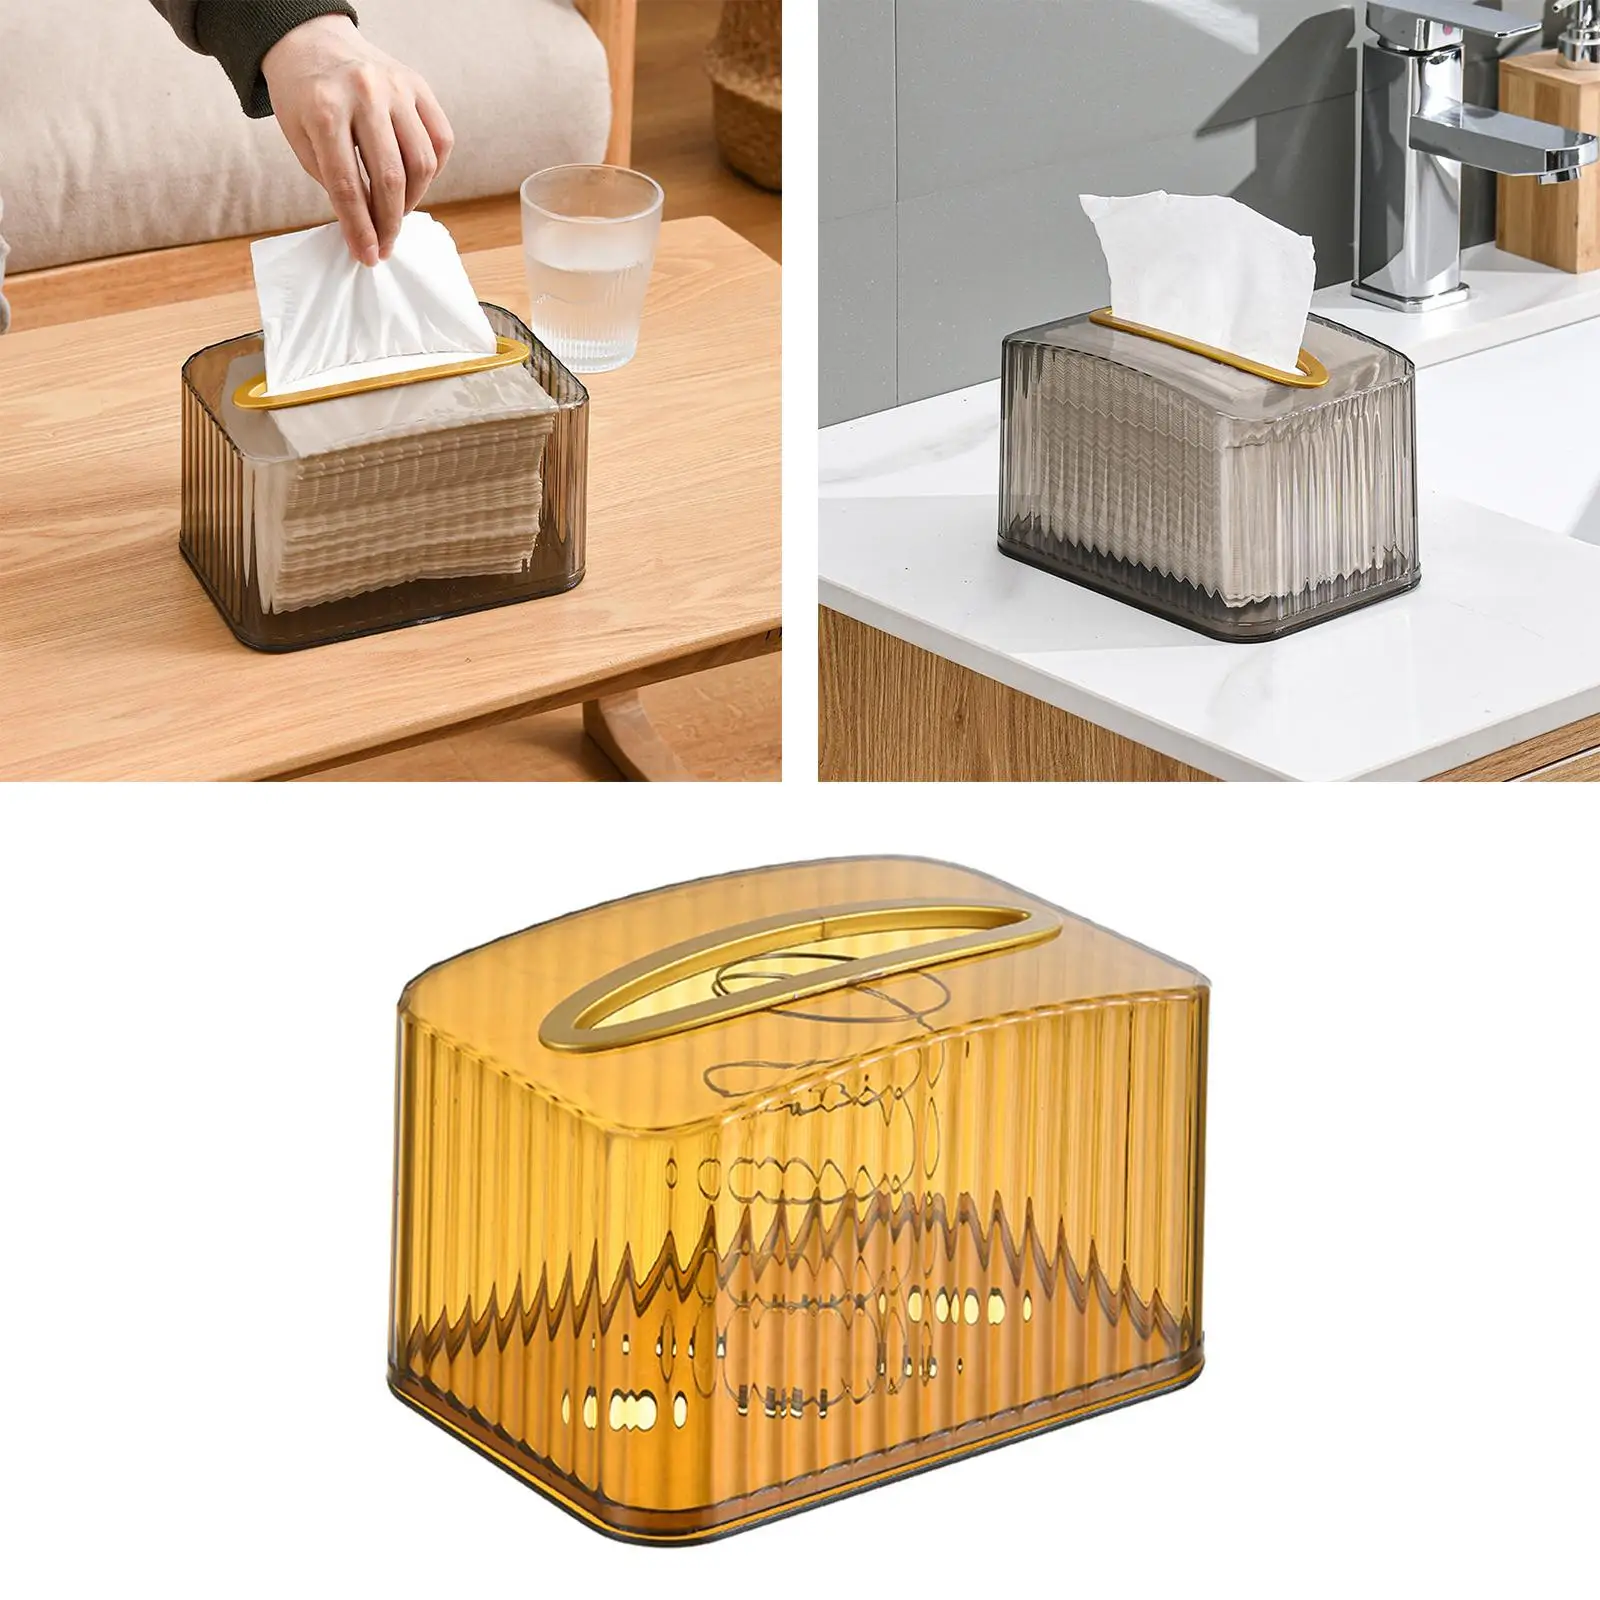 Water Proof Tissue Storage Box Household Supplies Plastic Tissue Box Facial Paper Dispenser Holder for Car Dinner Table Store